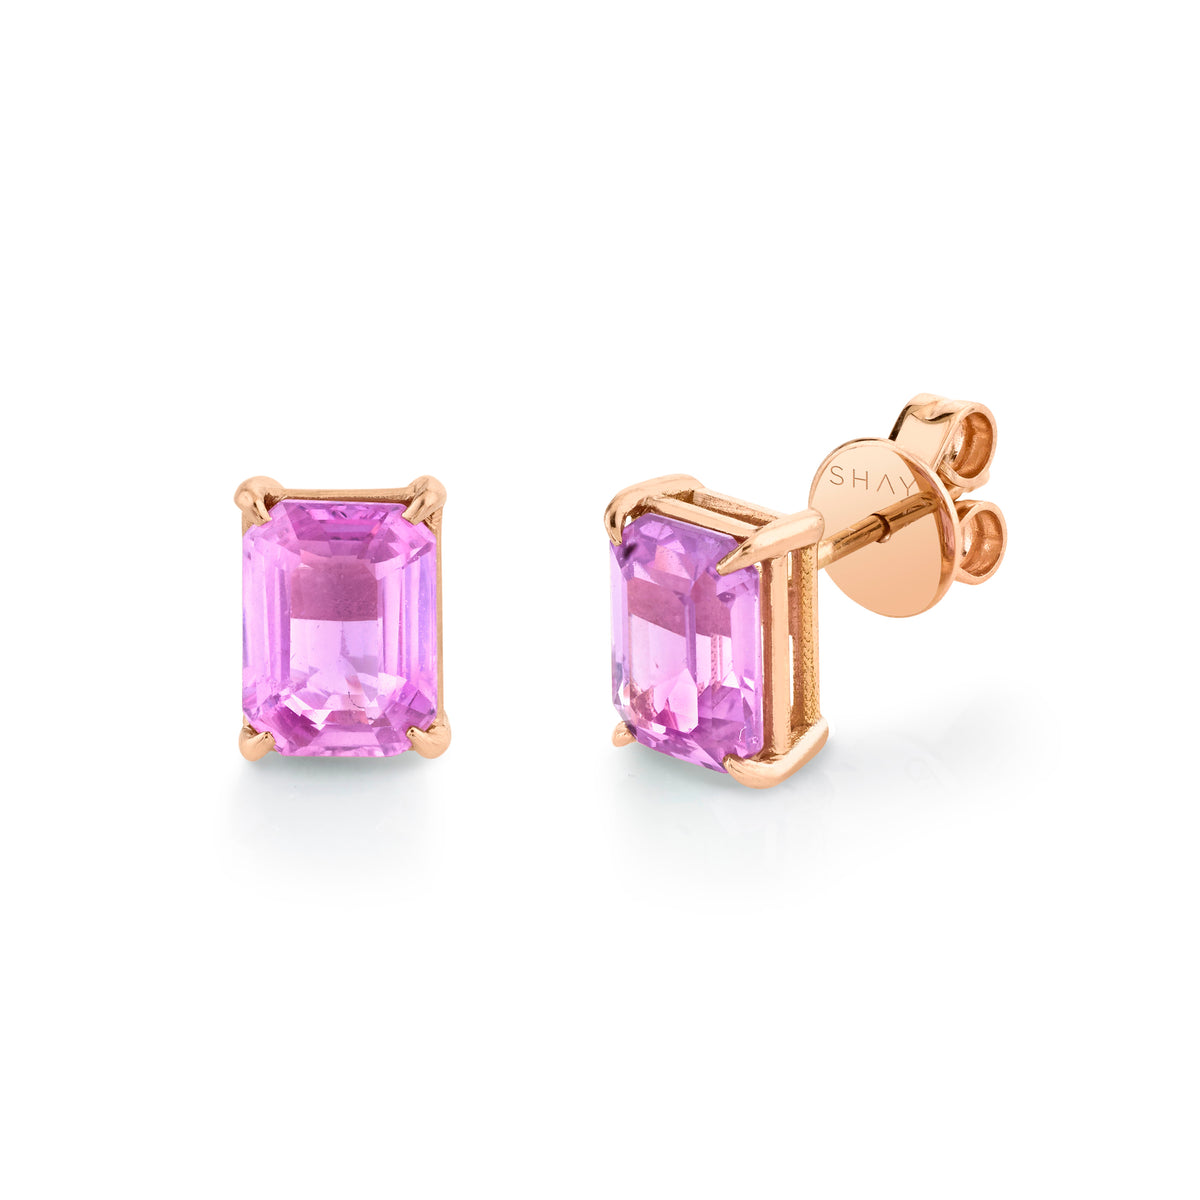 READY TO SHIP PINK SAPPHIRE EMERALD CUT STUDS, 3-4cts